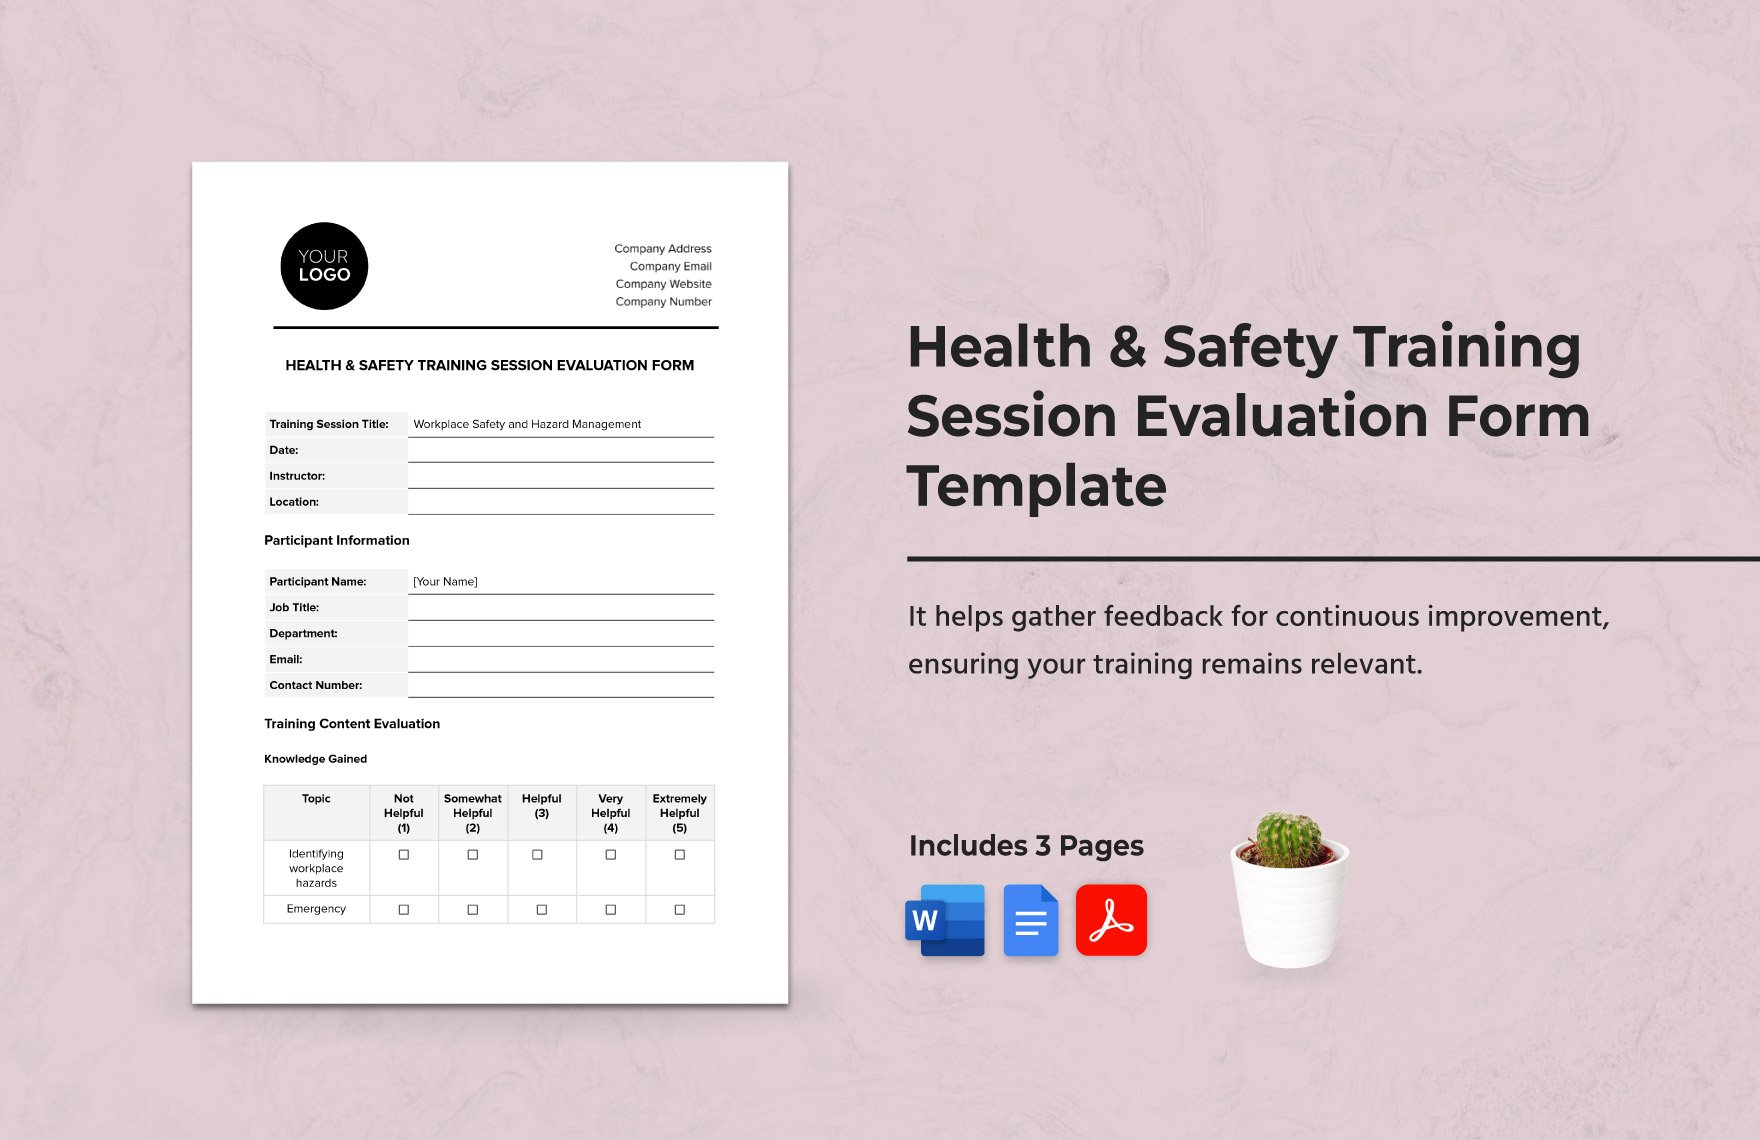 Health & Safety Training Session Evaluation Form Template